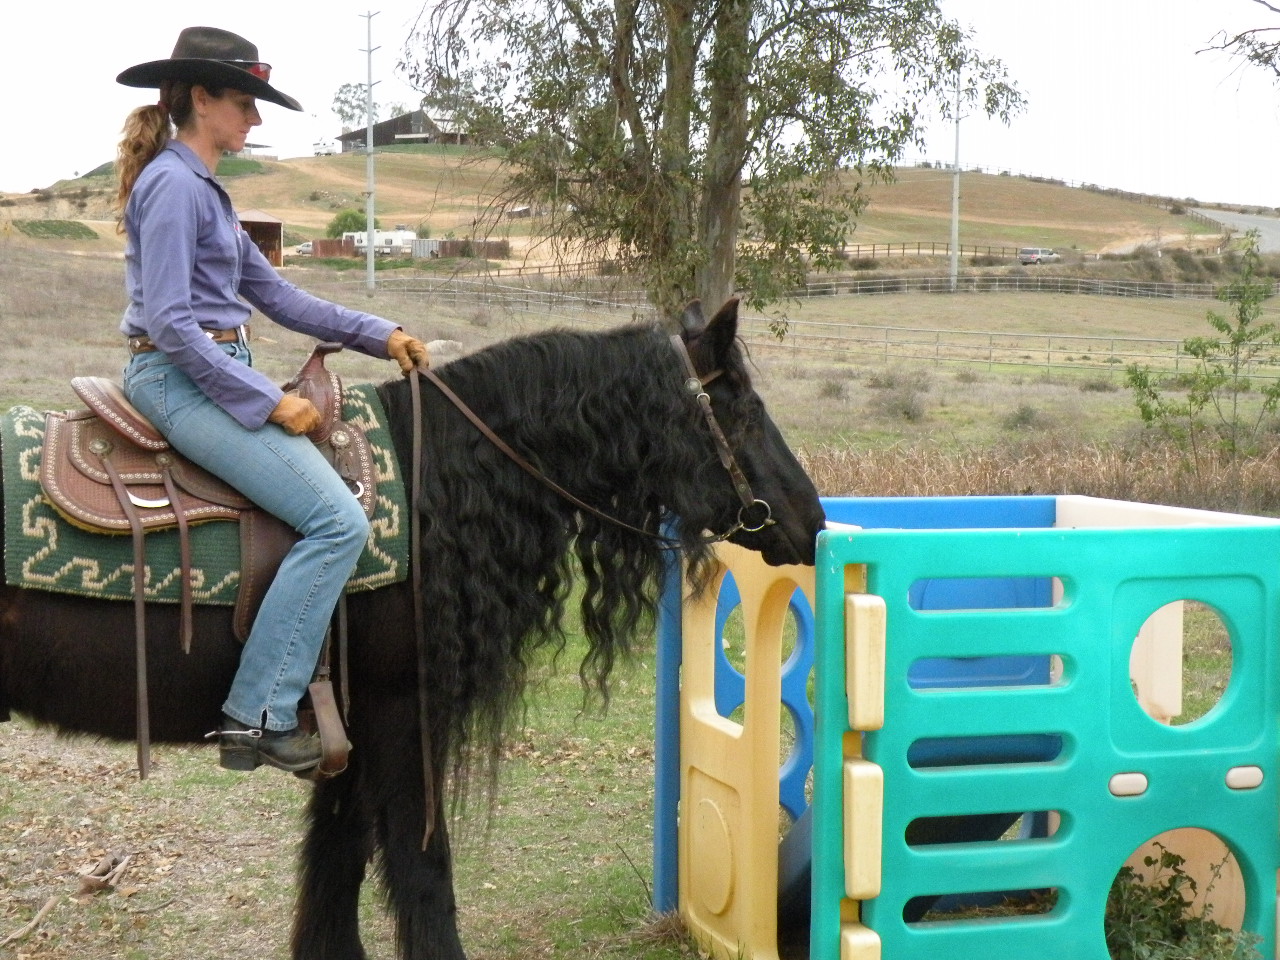 A person riding on the back of a black horse.